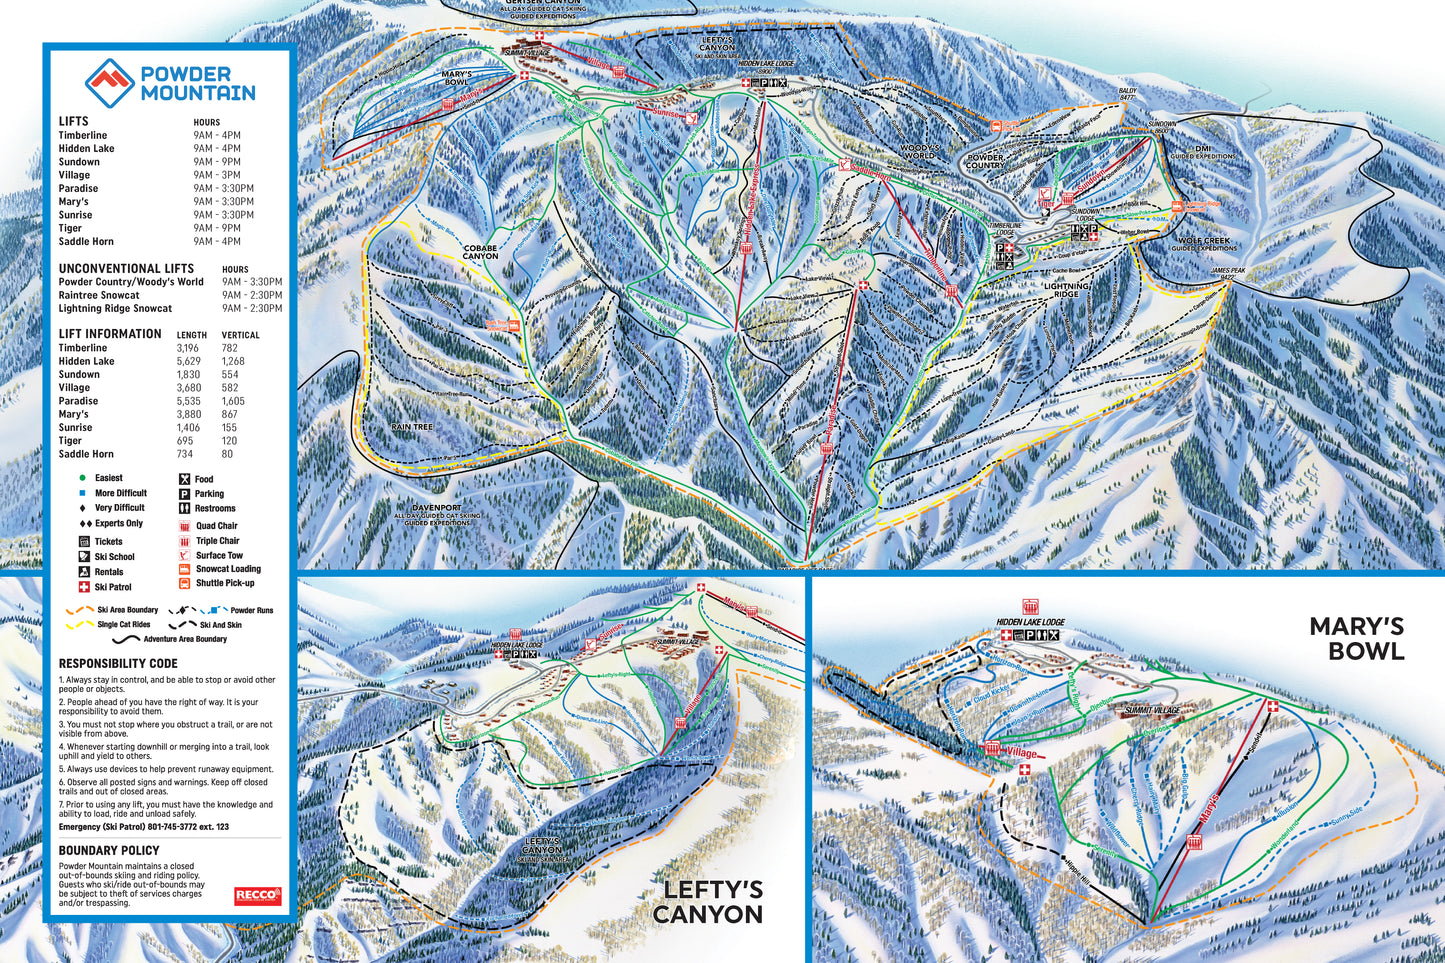 Trail map for Powder Mountain ski and snowboard trails.